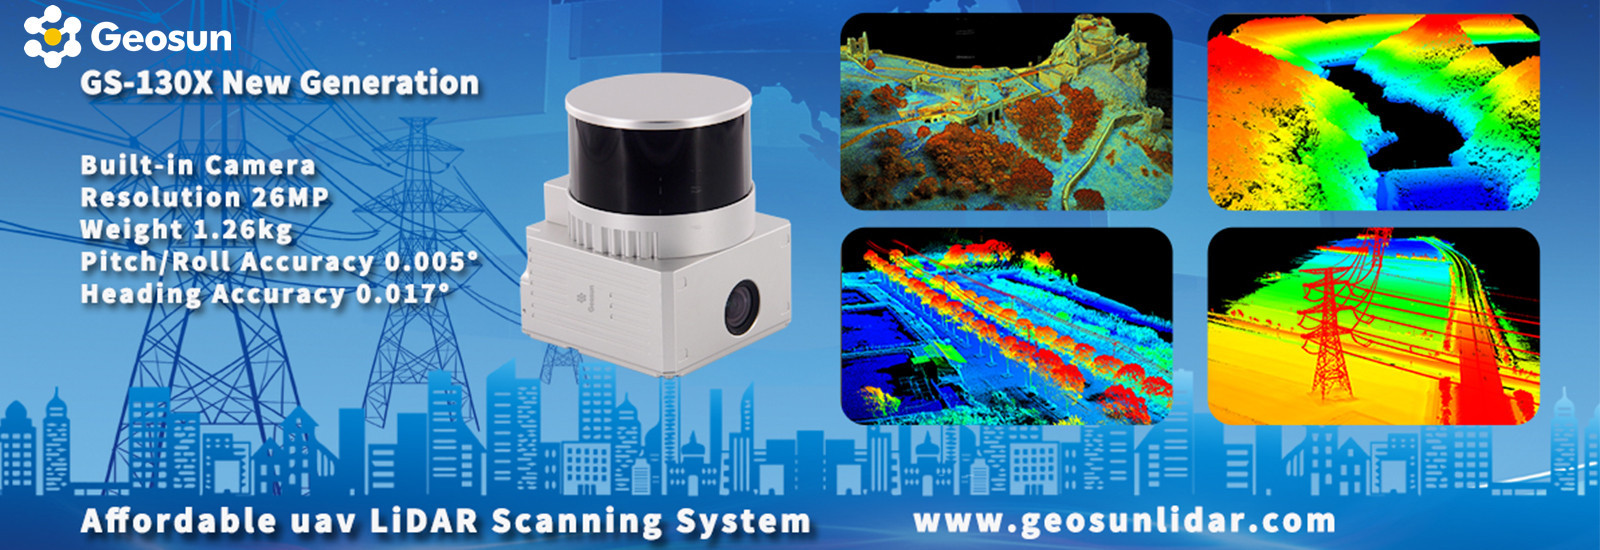 Fixed Wing Drone LiDAR GS-130X HESAI XT32 Sensor 1.26KG 3D Mapping Strong Penetration Forestry Powerline Surveying